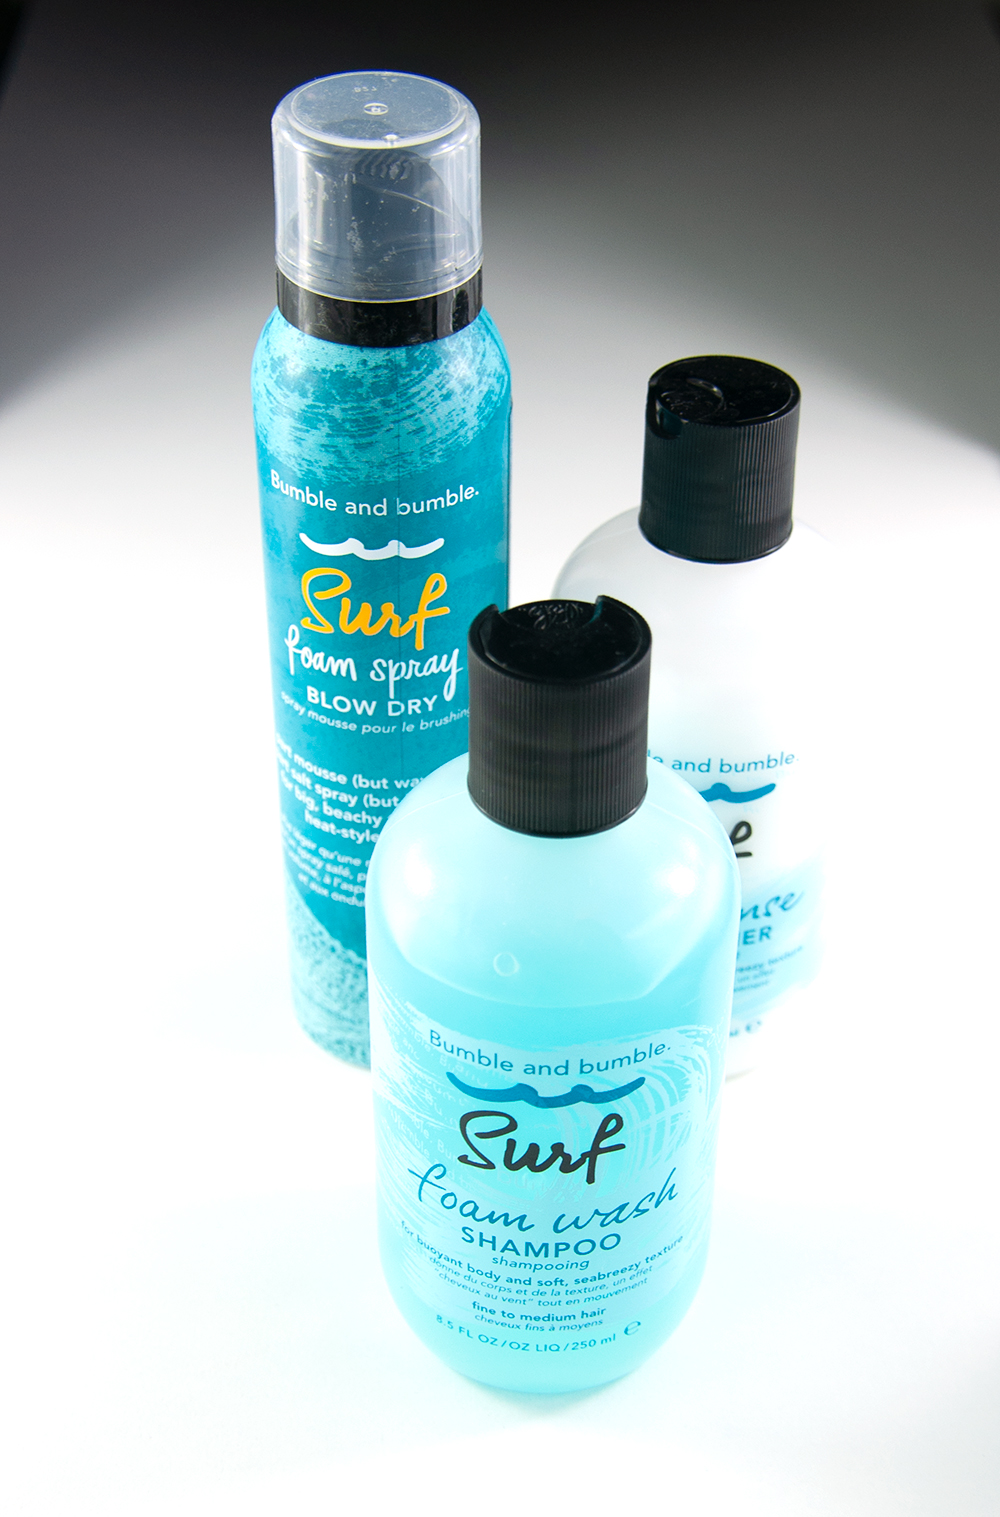 Bumble and Bumble Surf Products Haul